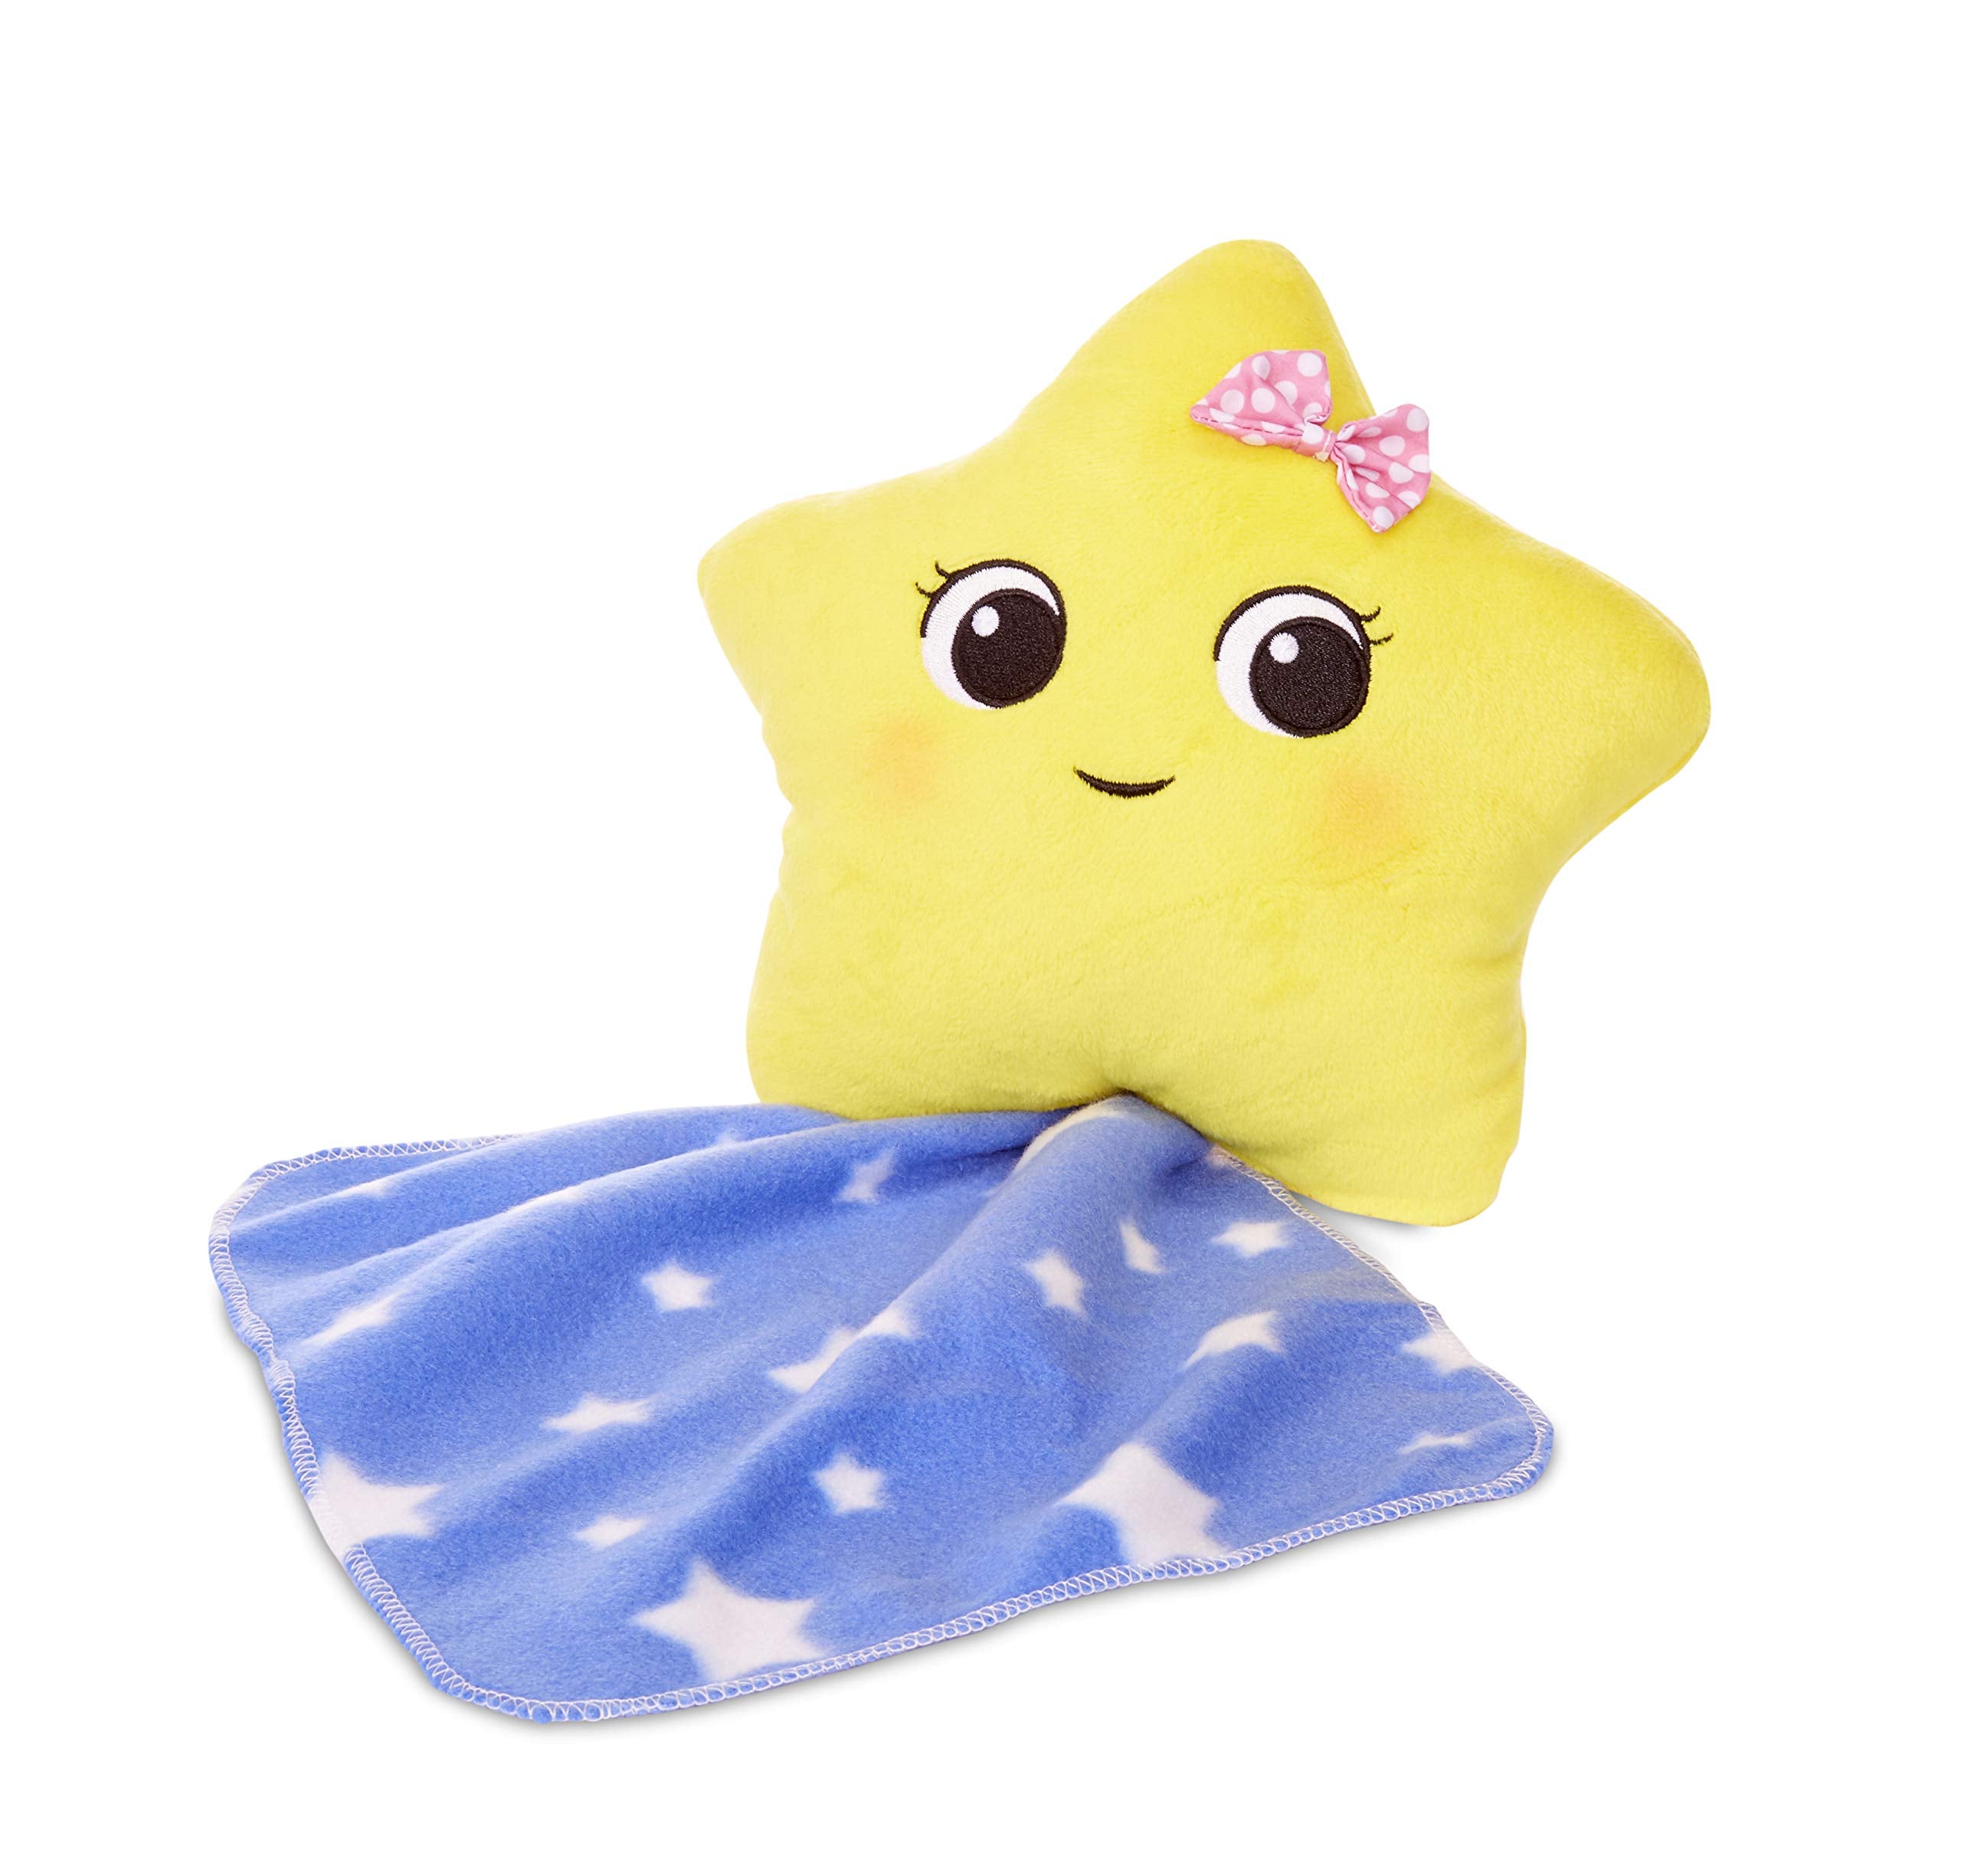 Little Baby Bum Little Tikes Twinkle the Star Plush - Soft & Huggable - Calming Music for Bedtime - Machine Washable